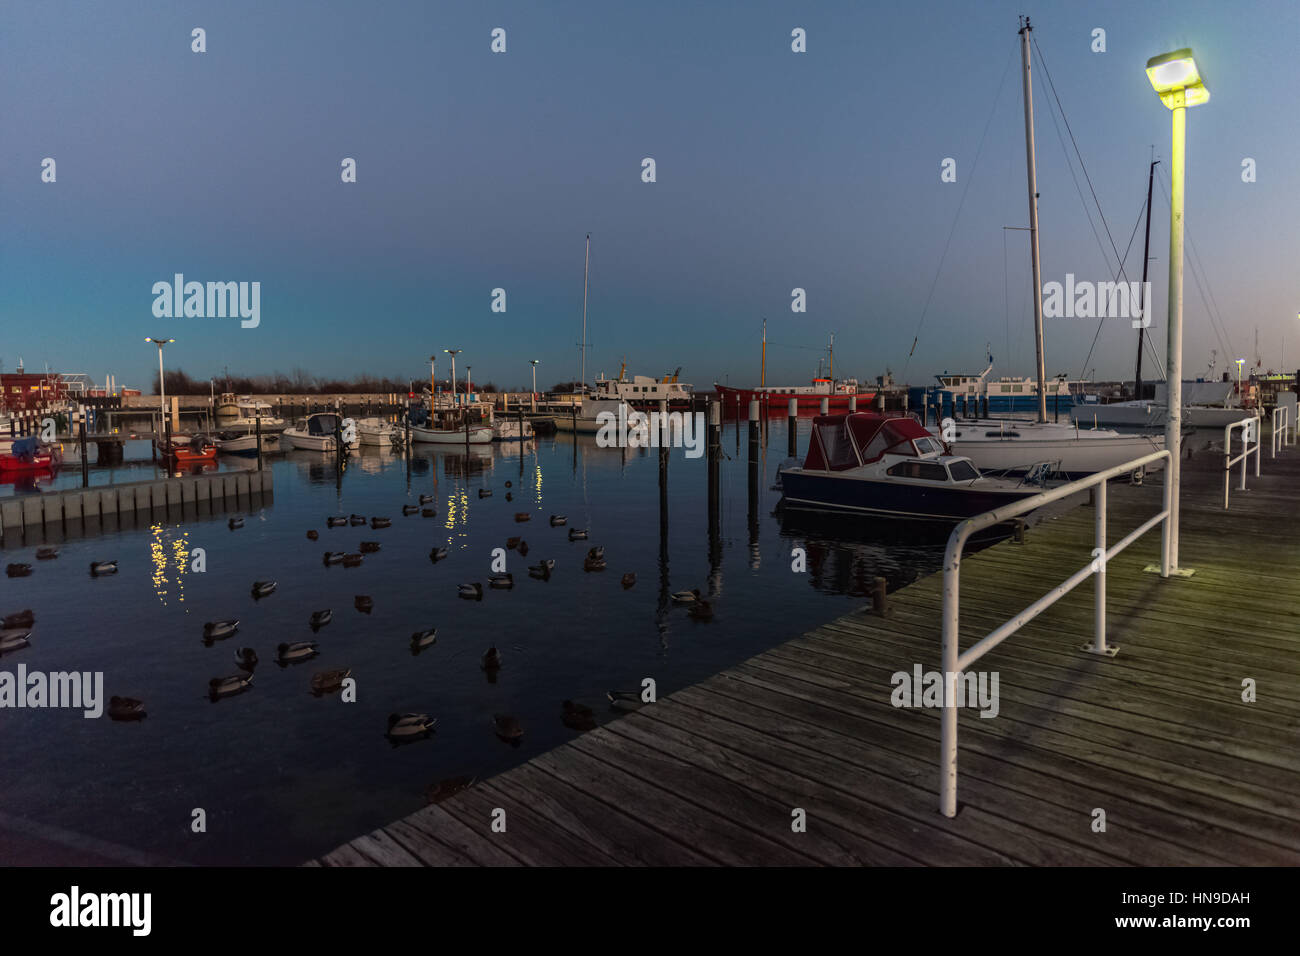 Marina of Strande community in winter time, Baltic Sea, Schleswig Holstein, Germany Stock Photo